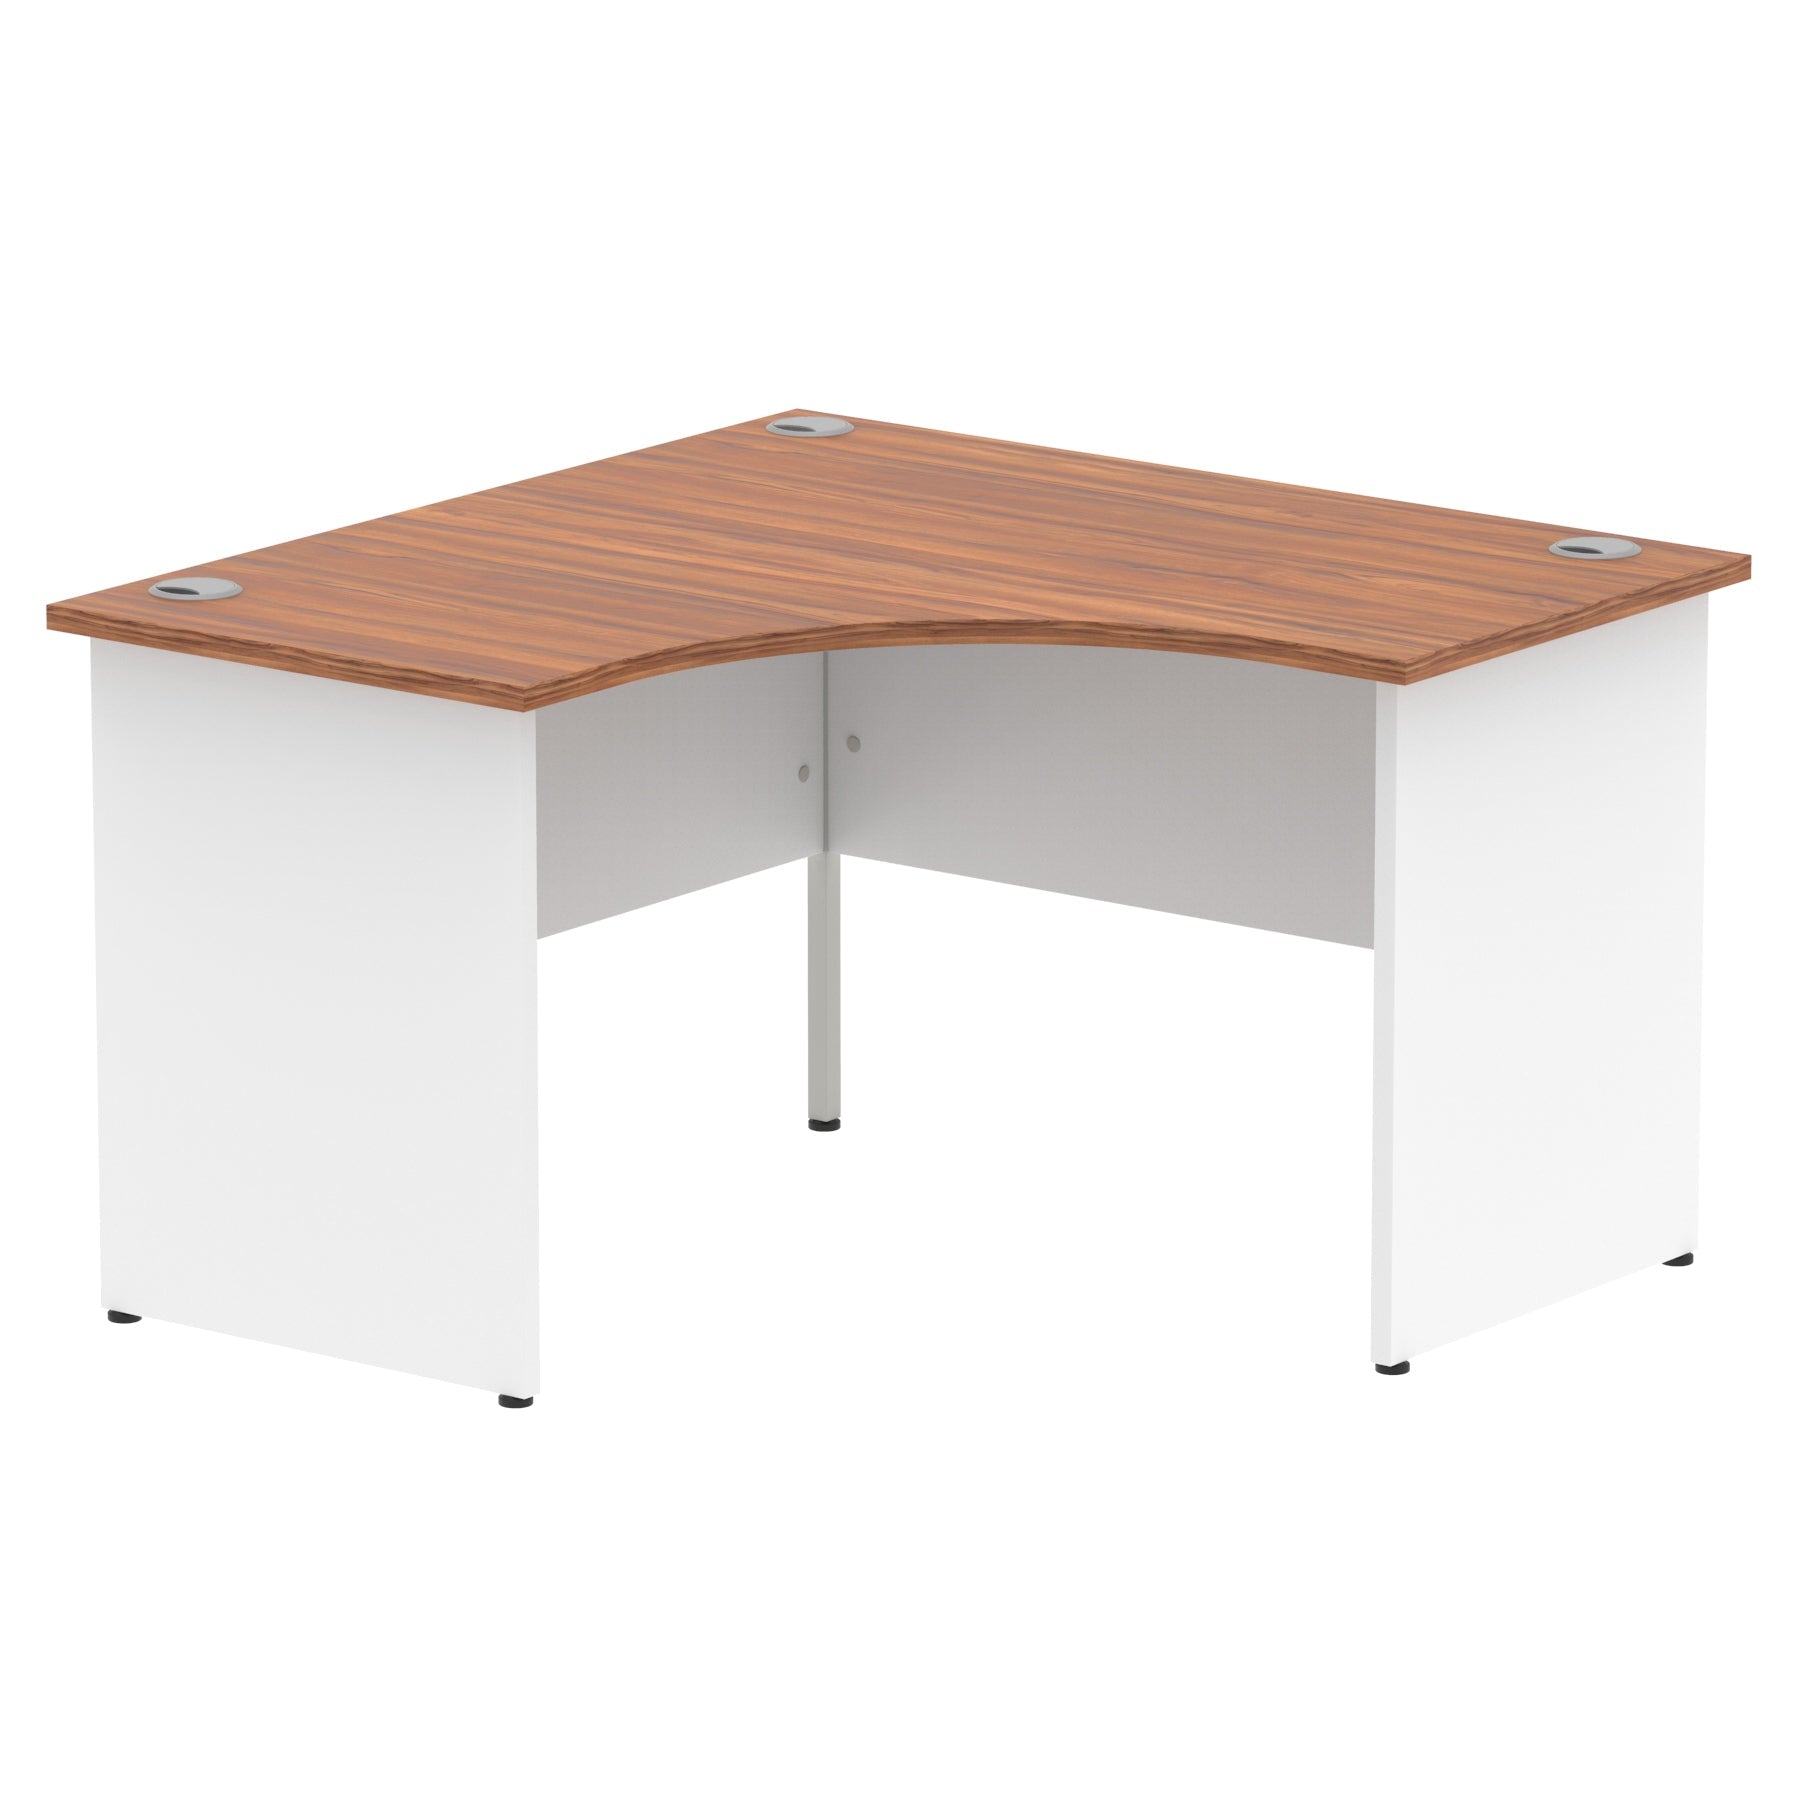 Impulse 1200mm Panel End Corner Desk - MFC Material, Self-Assembly, 5-Year Guarantee, 1200x1200 Top, White & Matching Frame, 50.1kg